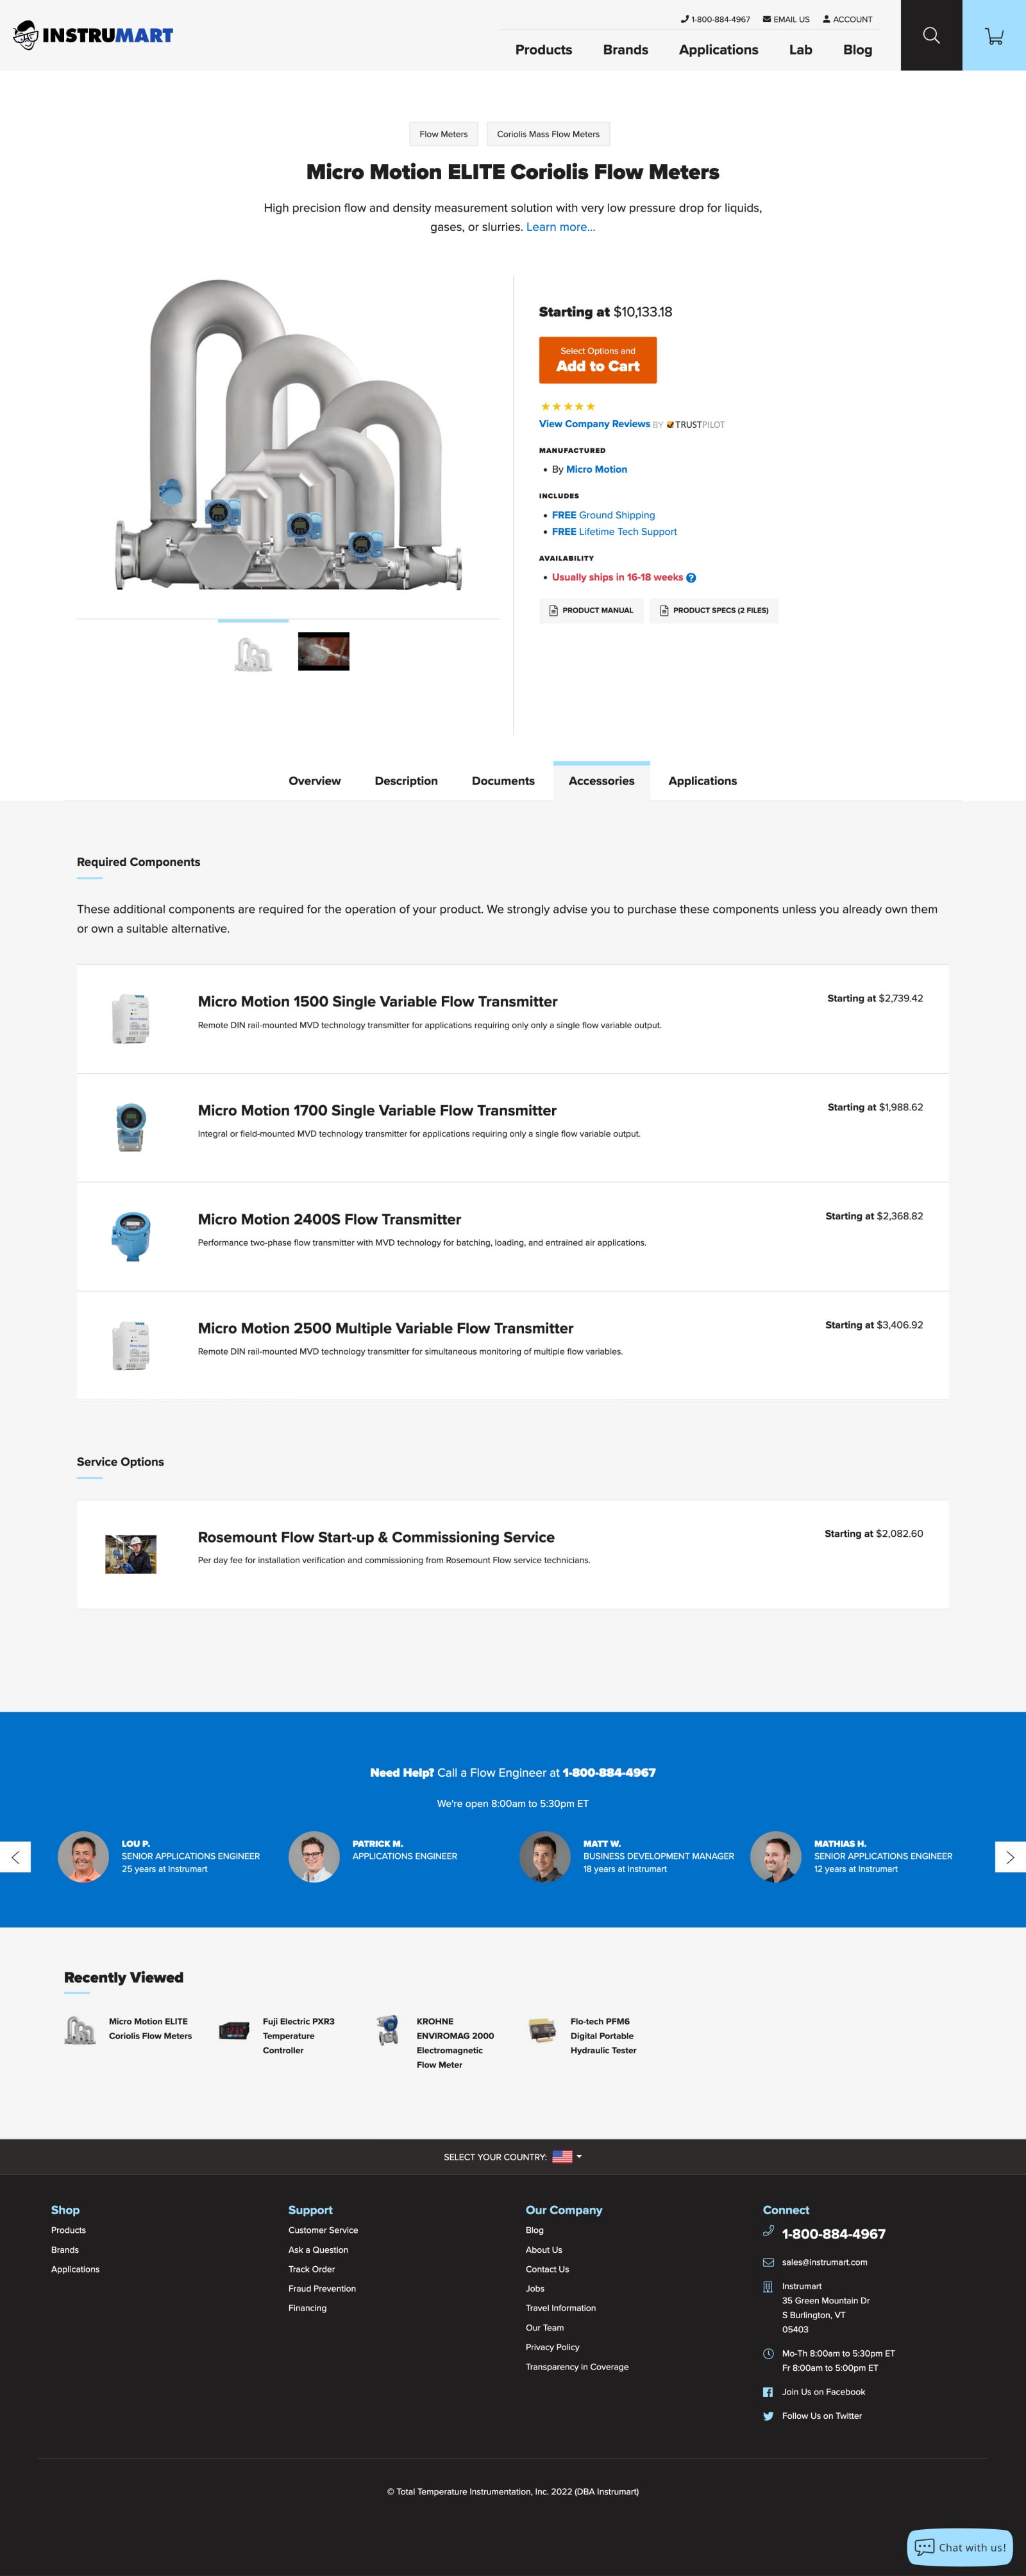 Instrumart product detail page